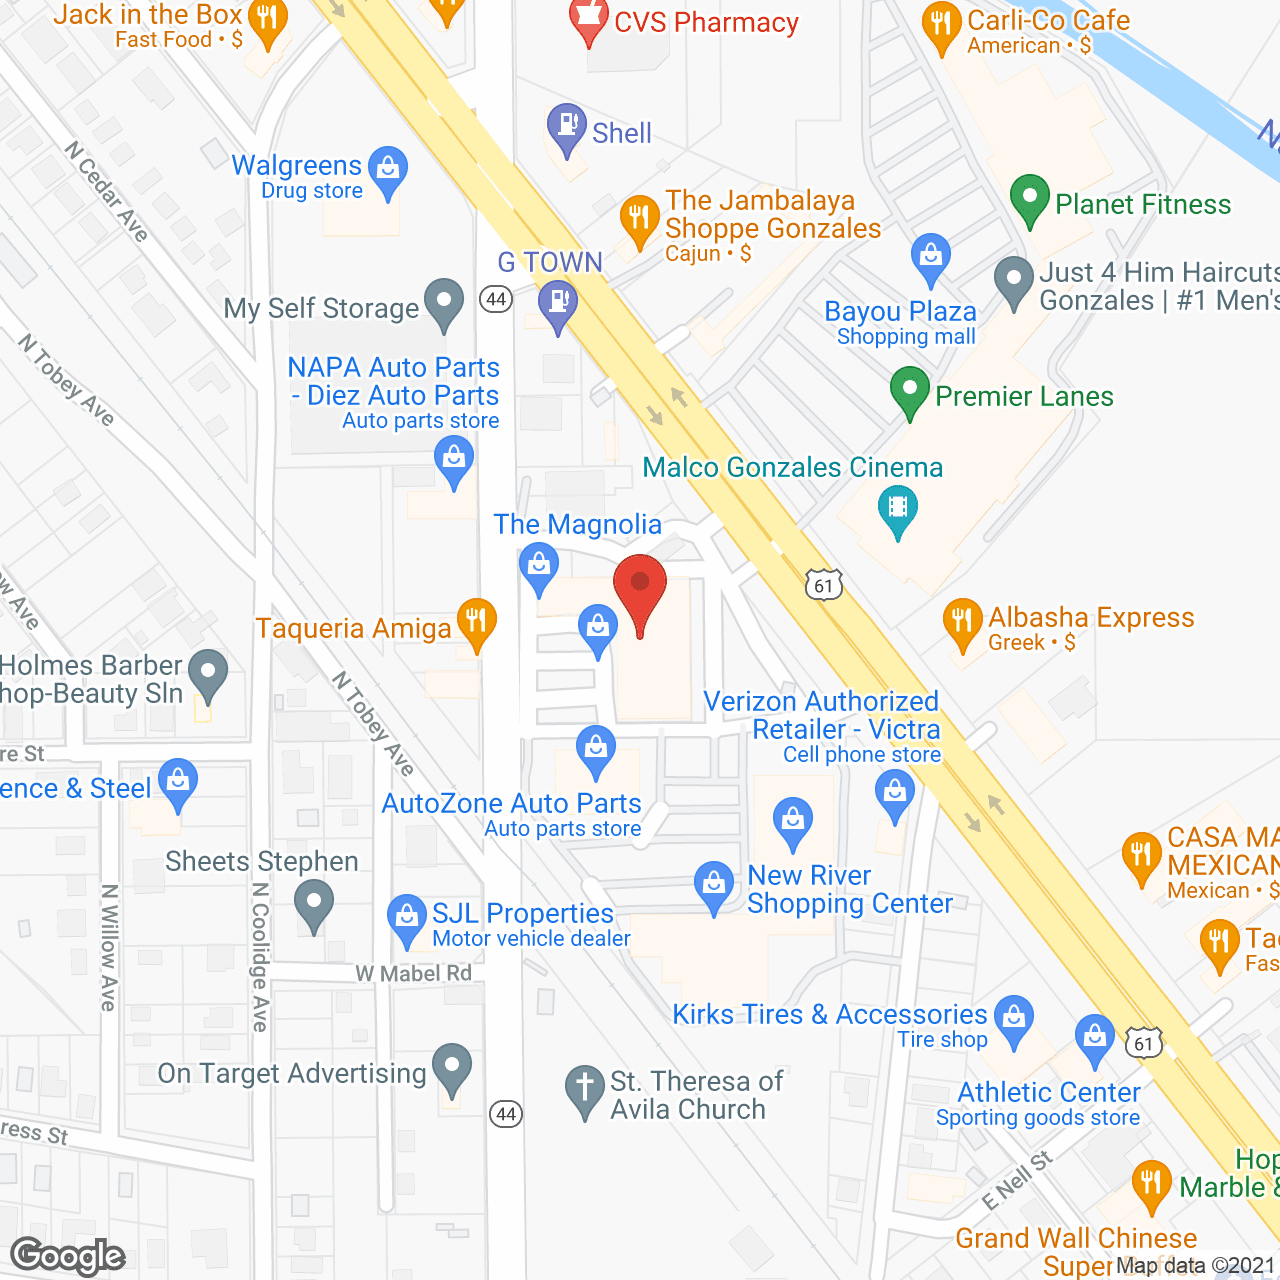 Southern Nursing Home Care in google map